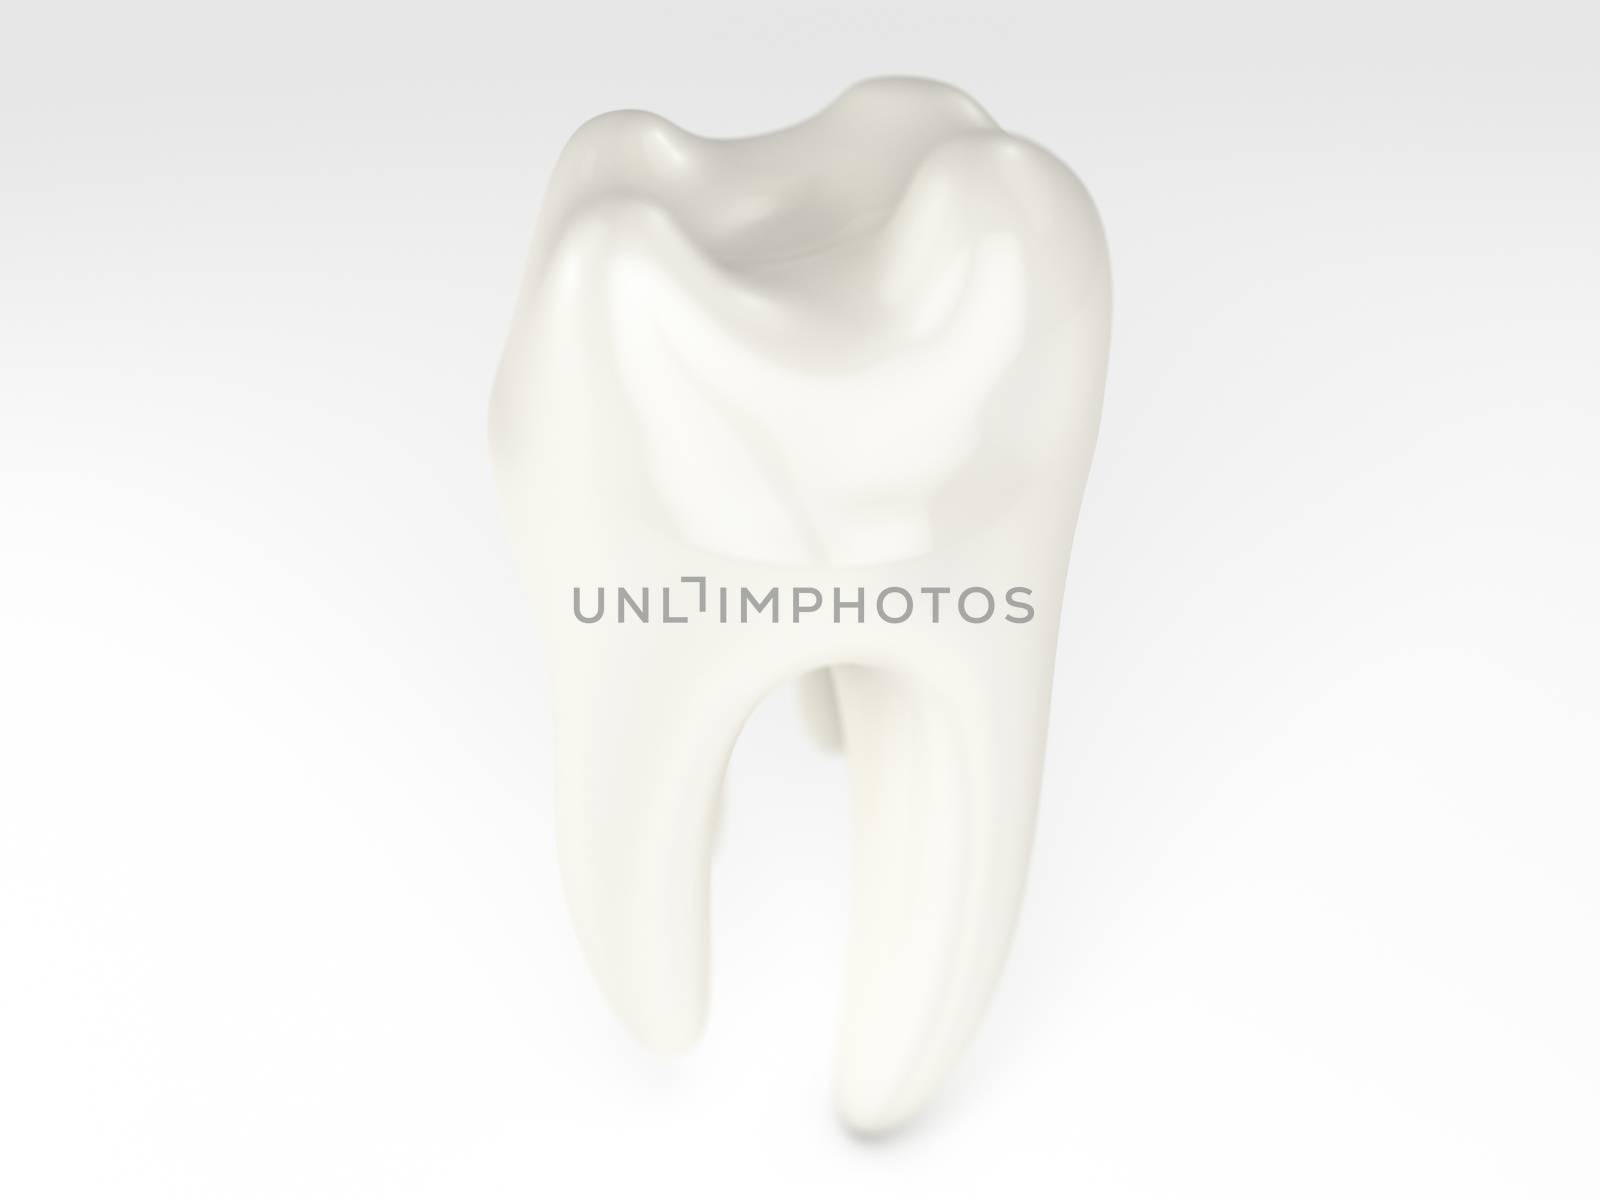 A 3D rendering of an off colour tooth on a white background